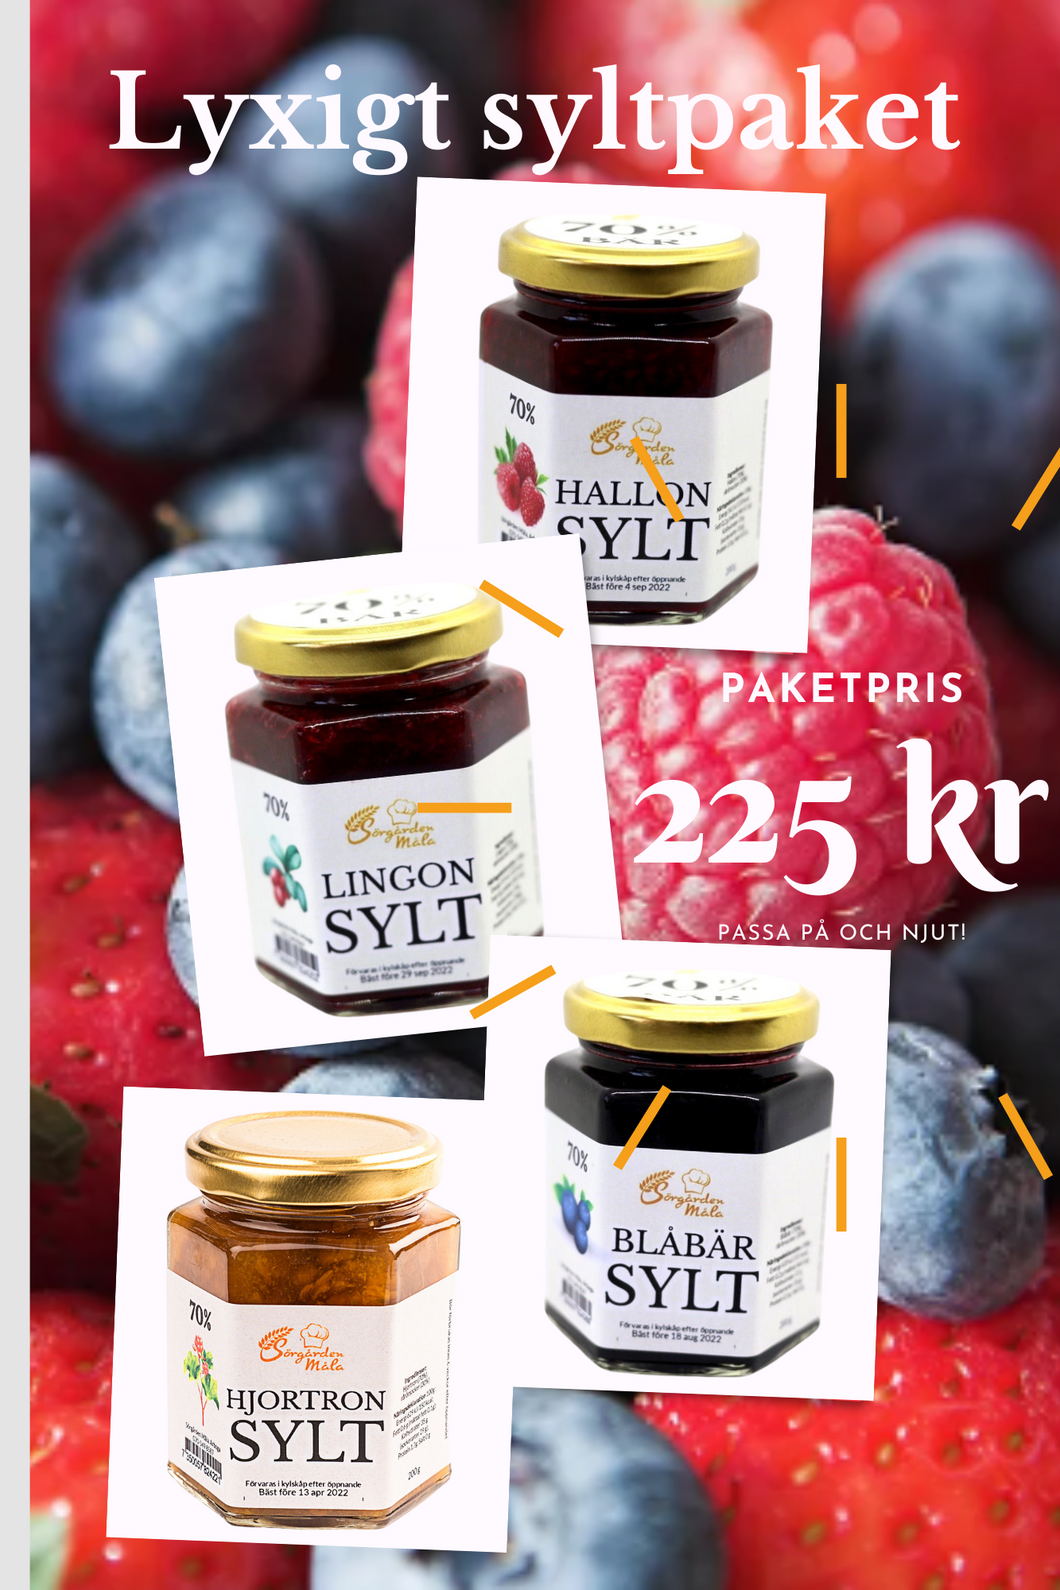 Luxury jam pack - our delicious natural good jams